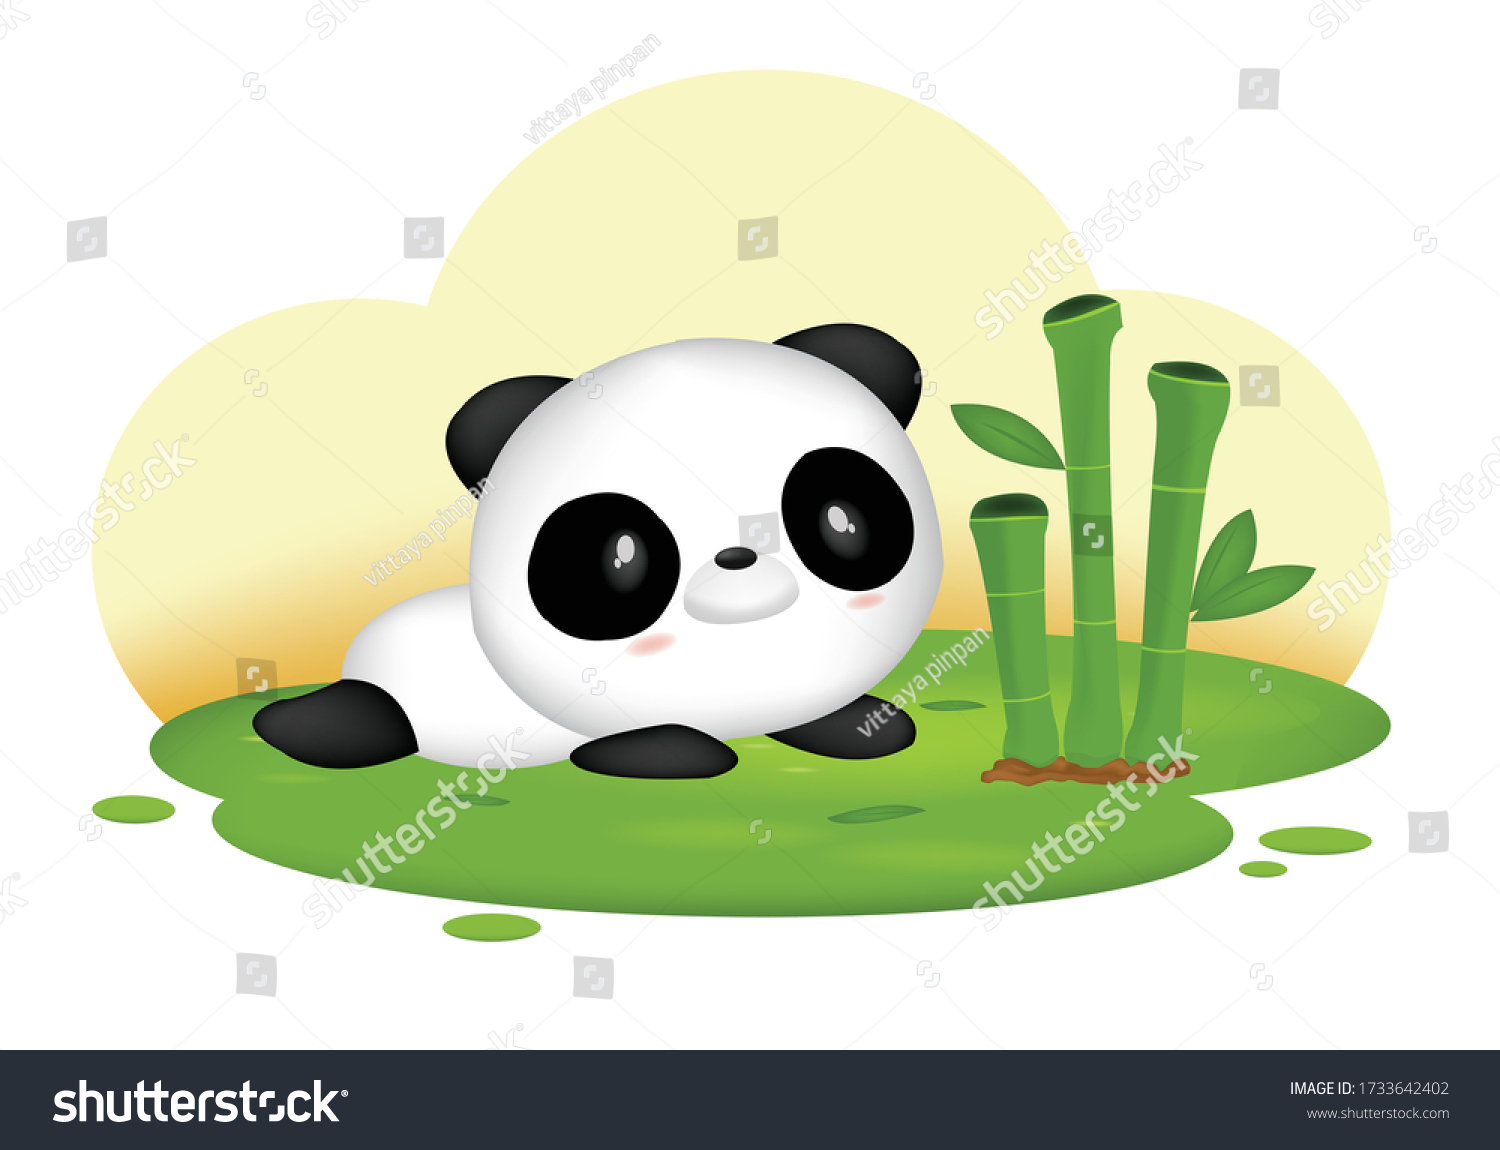 SVG of Vector illustration of a panda in the forest svg